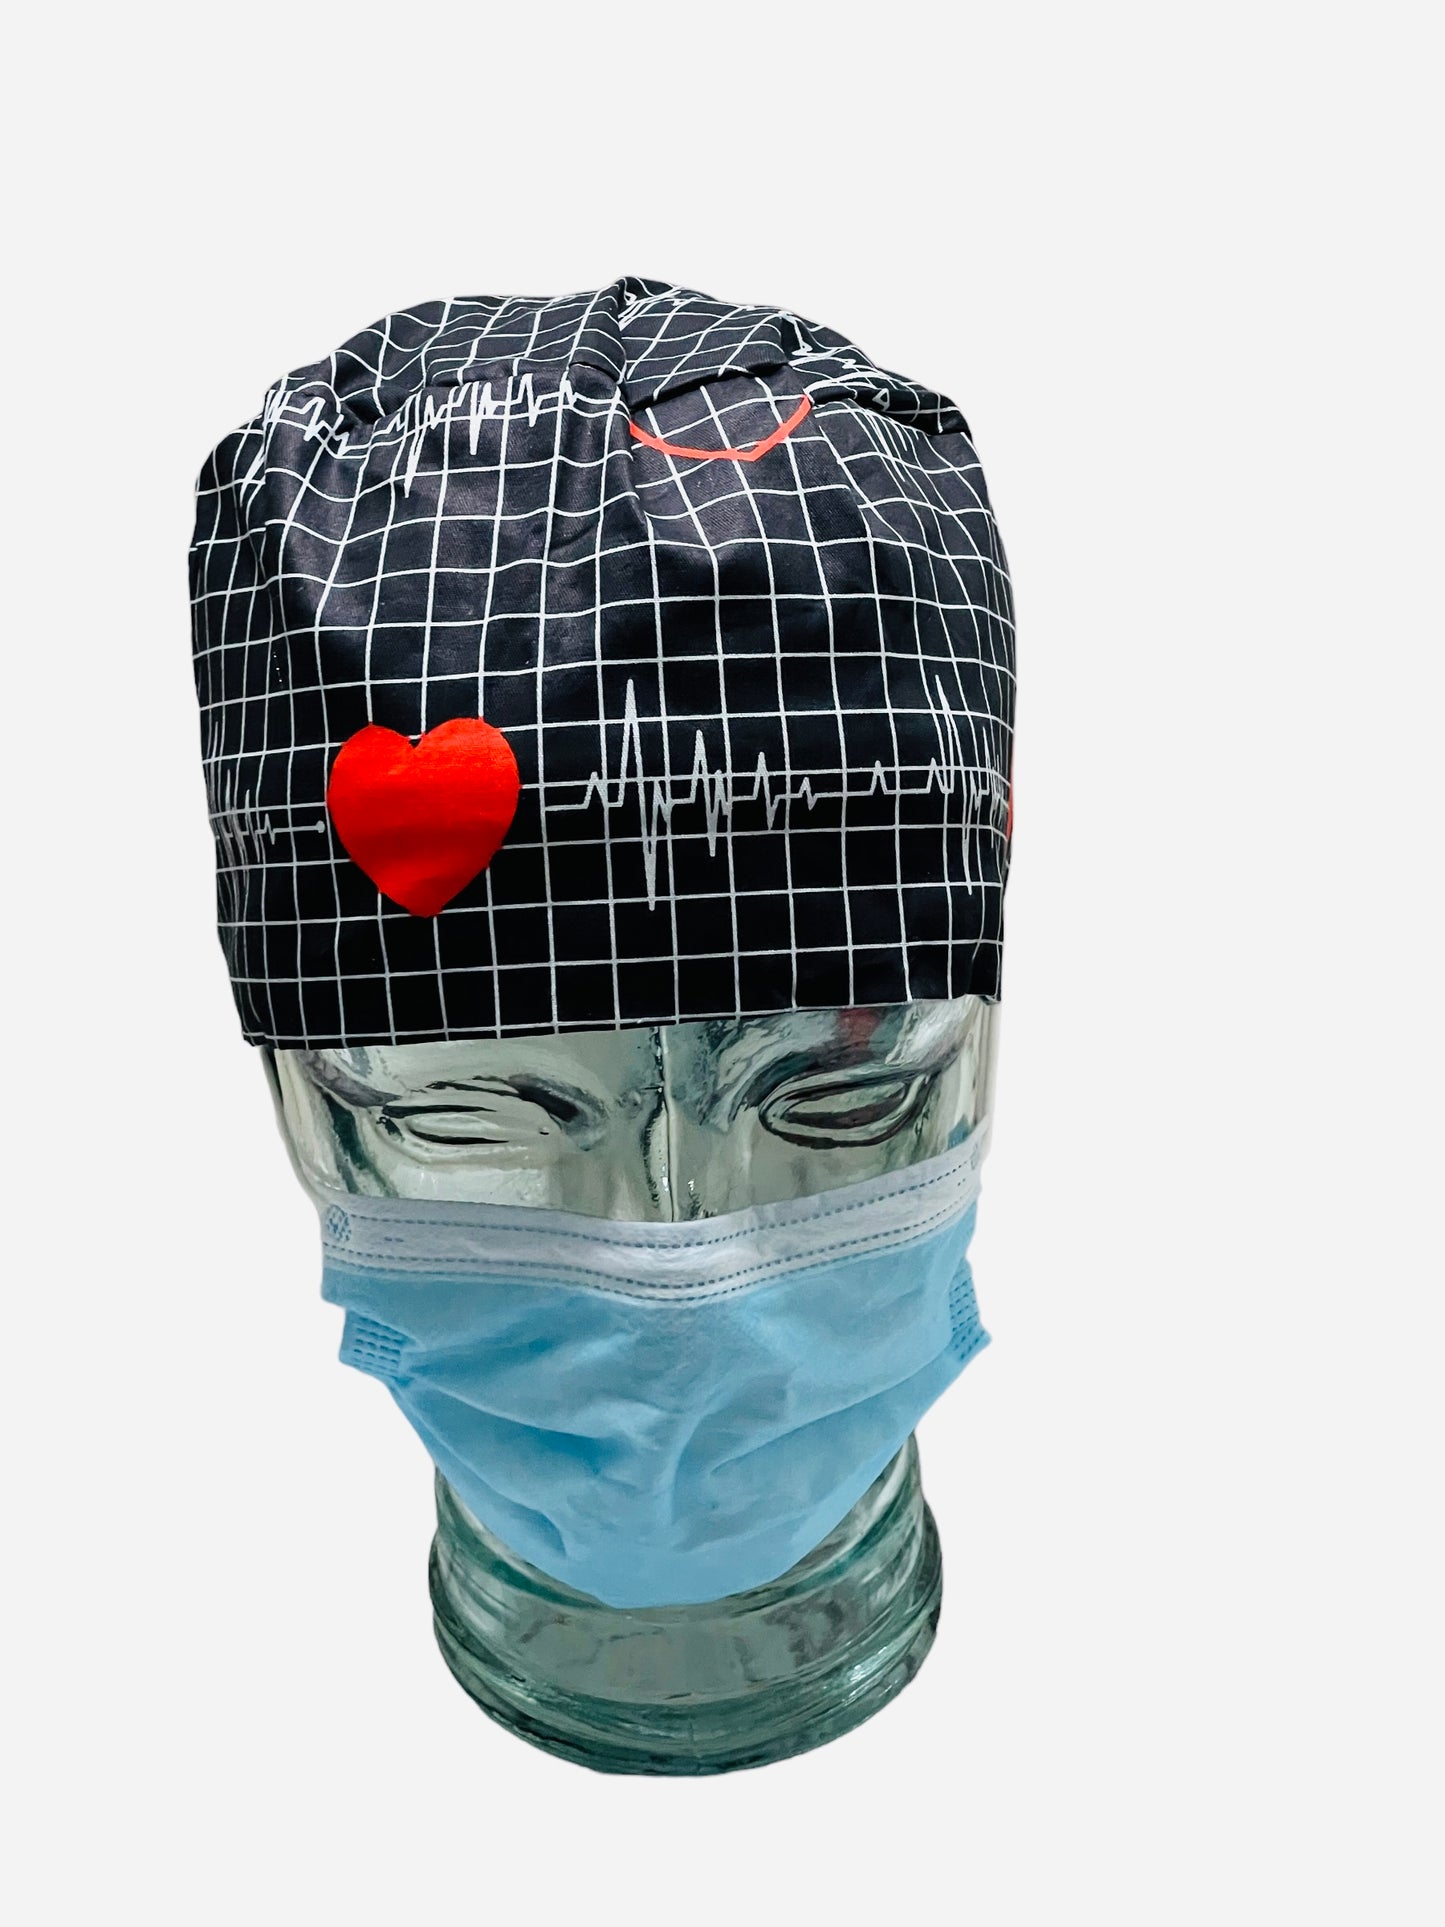 Ponytail Scrub Hat-EKG with Buttons